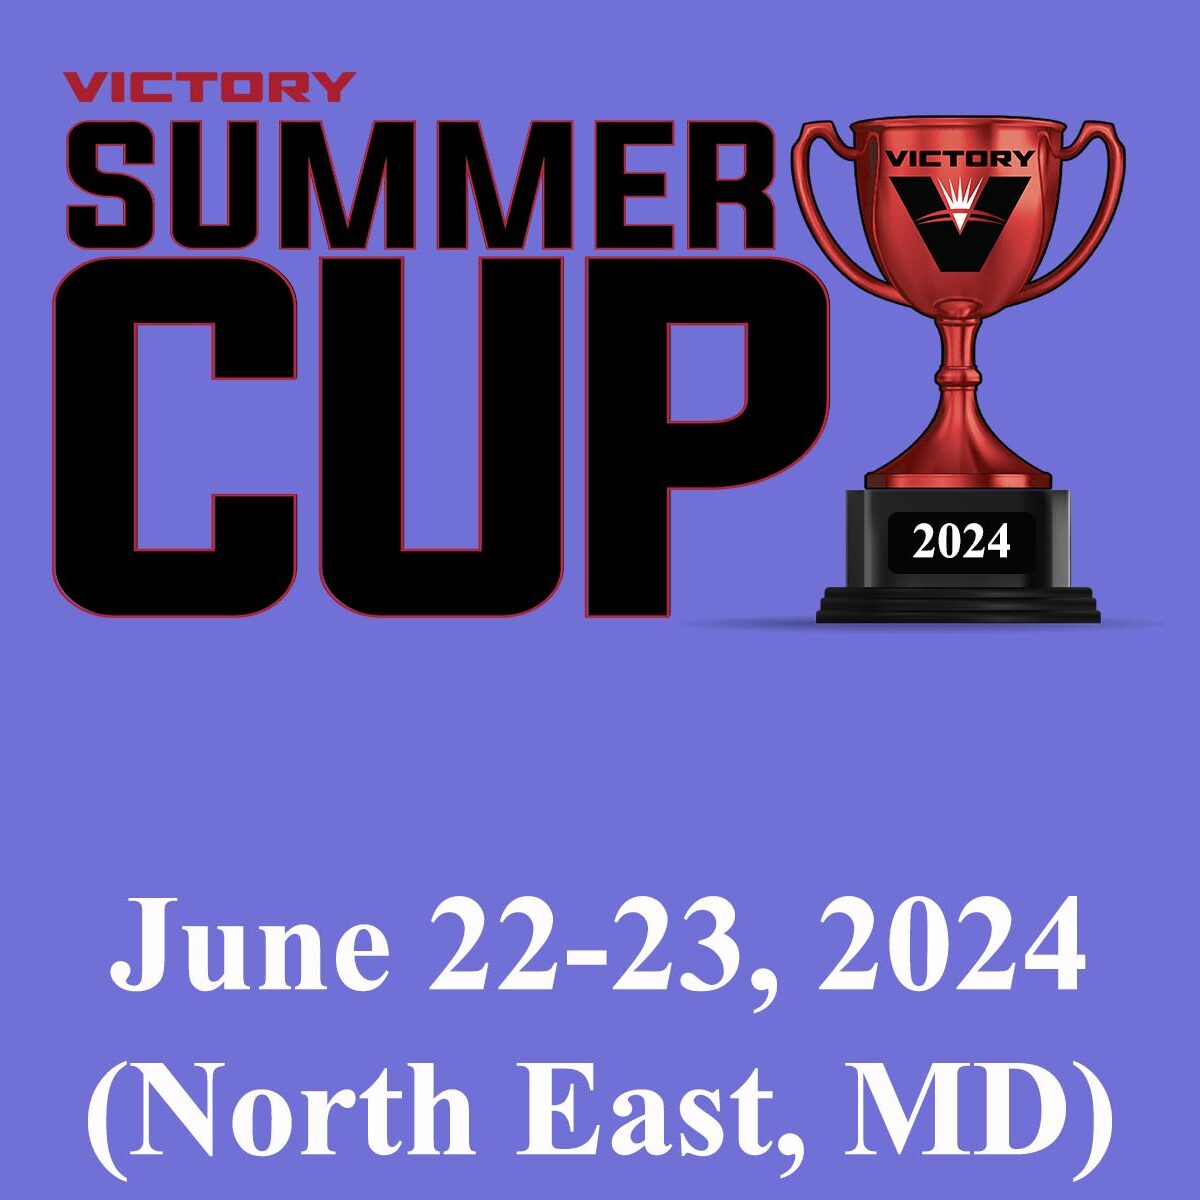 2024 Liberty Summer Cup Button